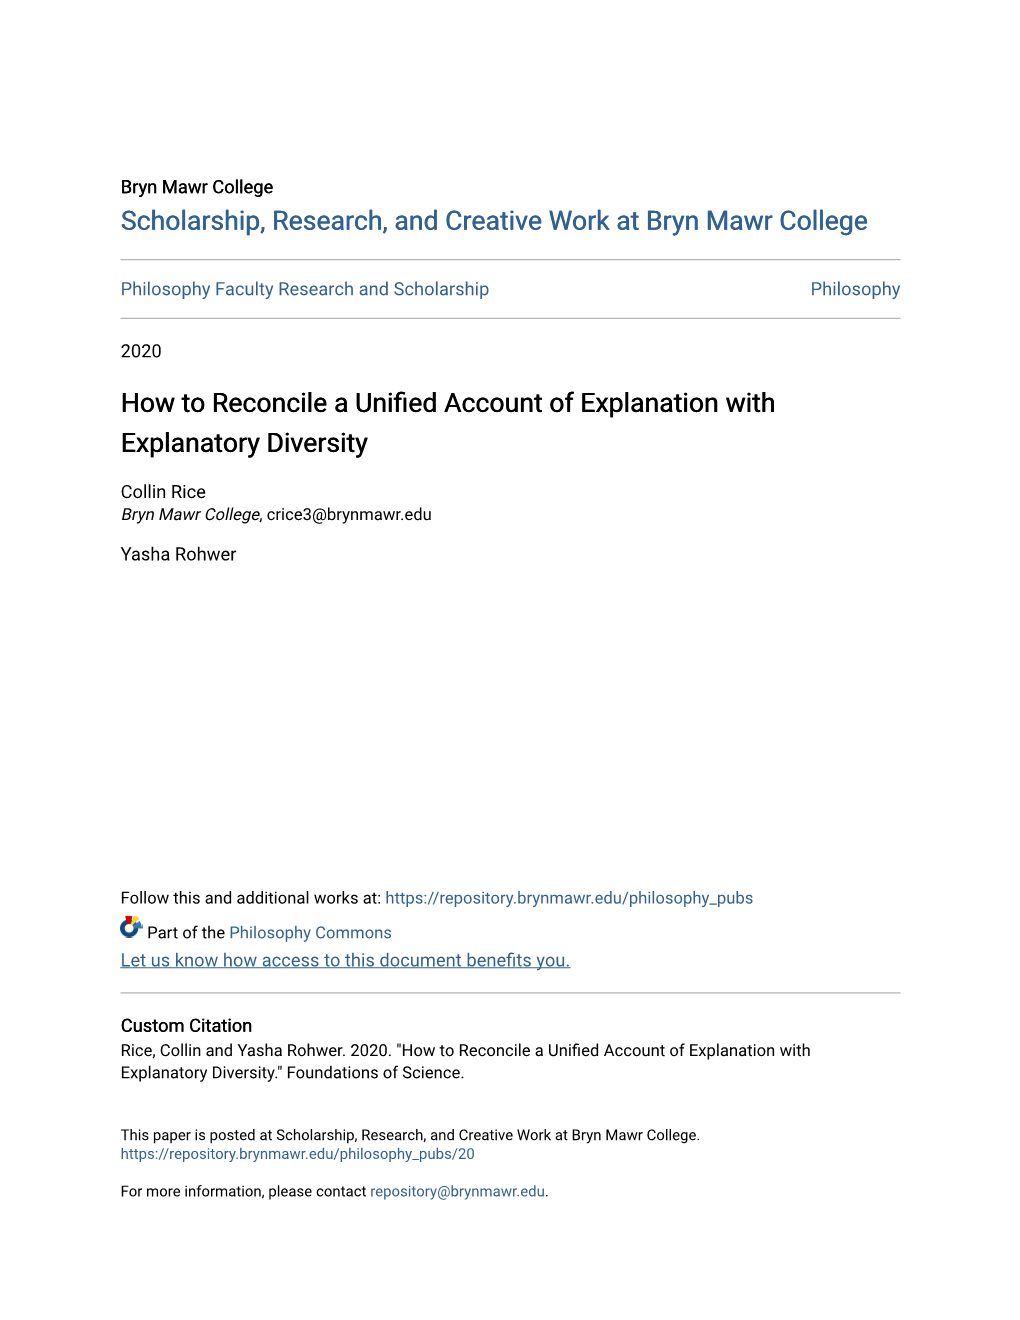 How to Reconcile a Unified Account of Explanation with Explanatory Diversity